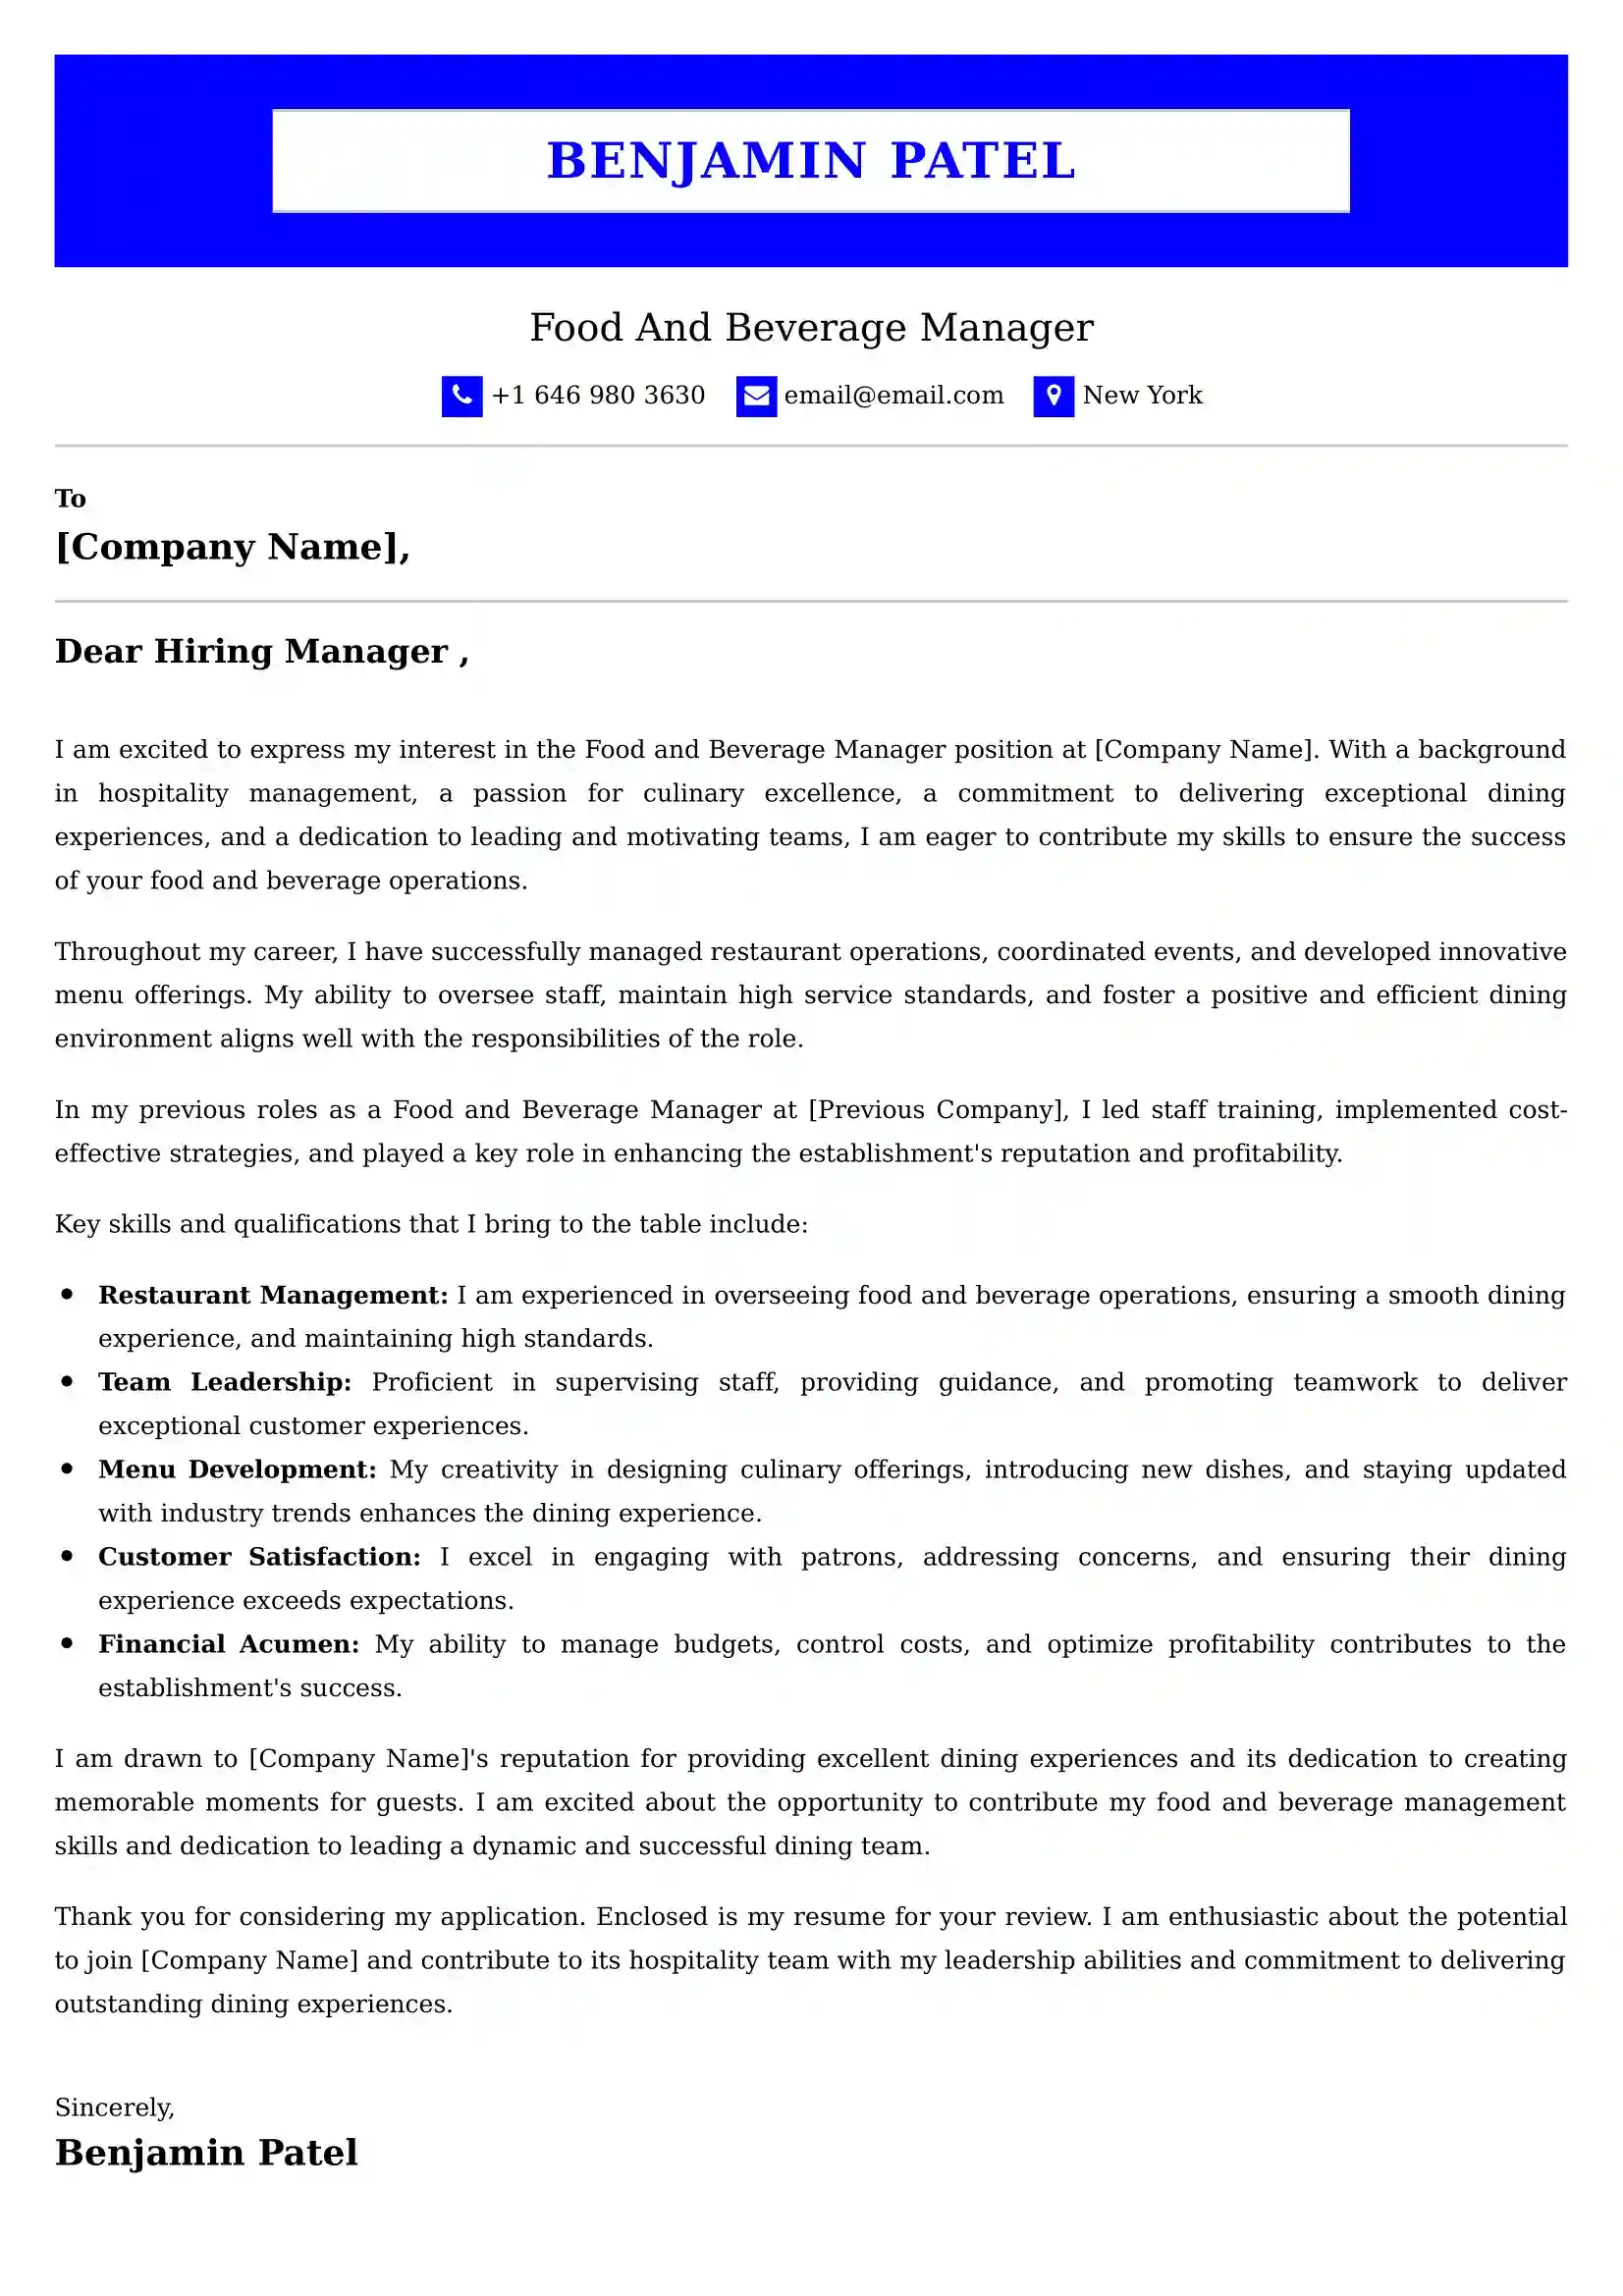 Food And Beverage Server Cover Letter Examples UK - Tips and Guide